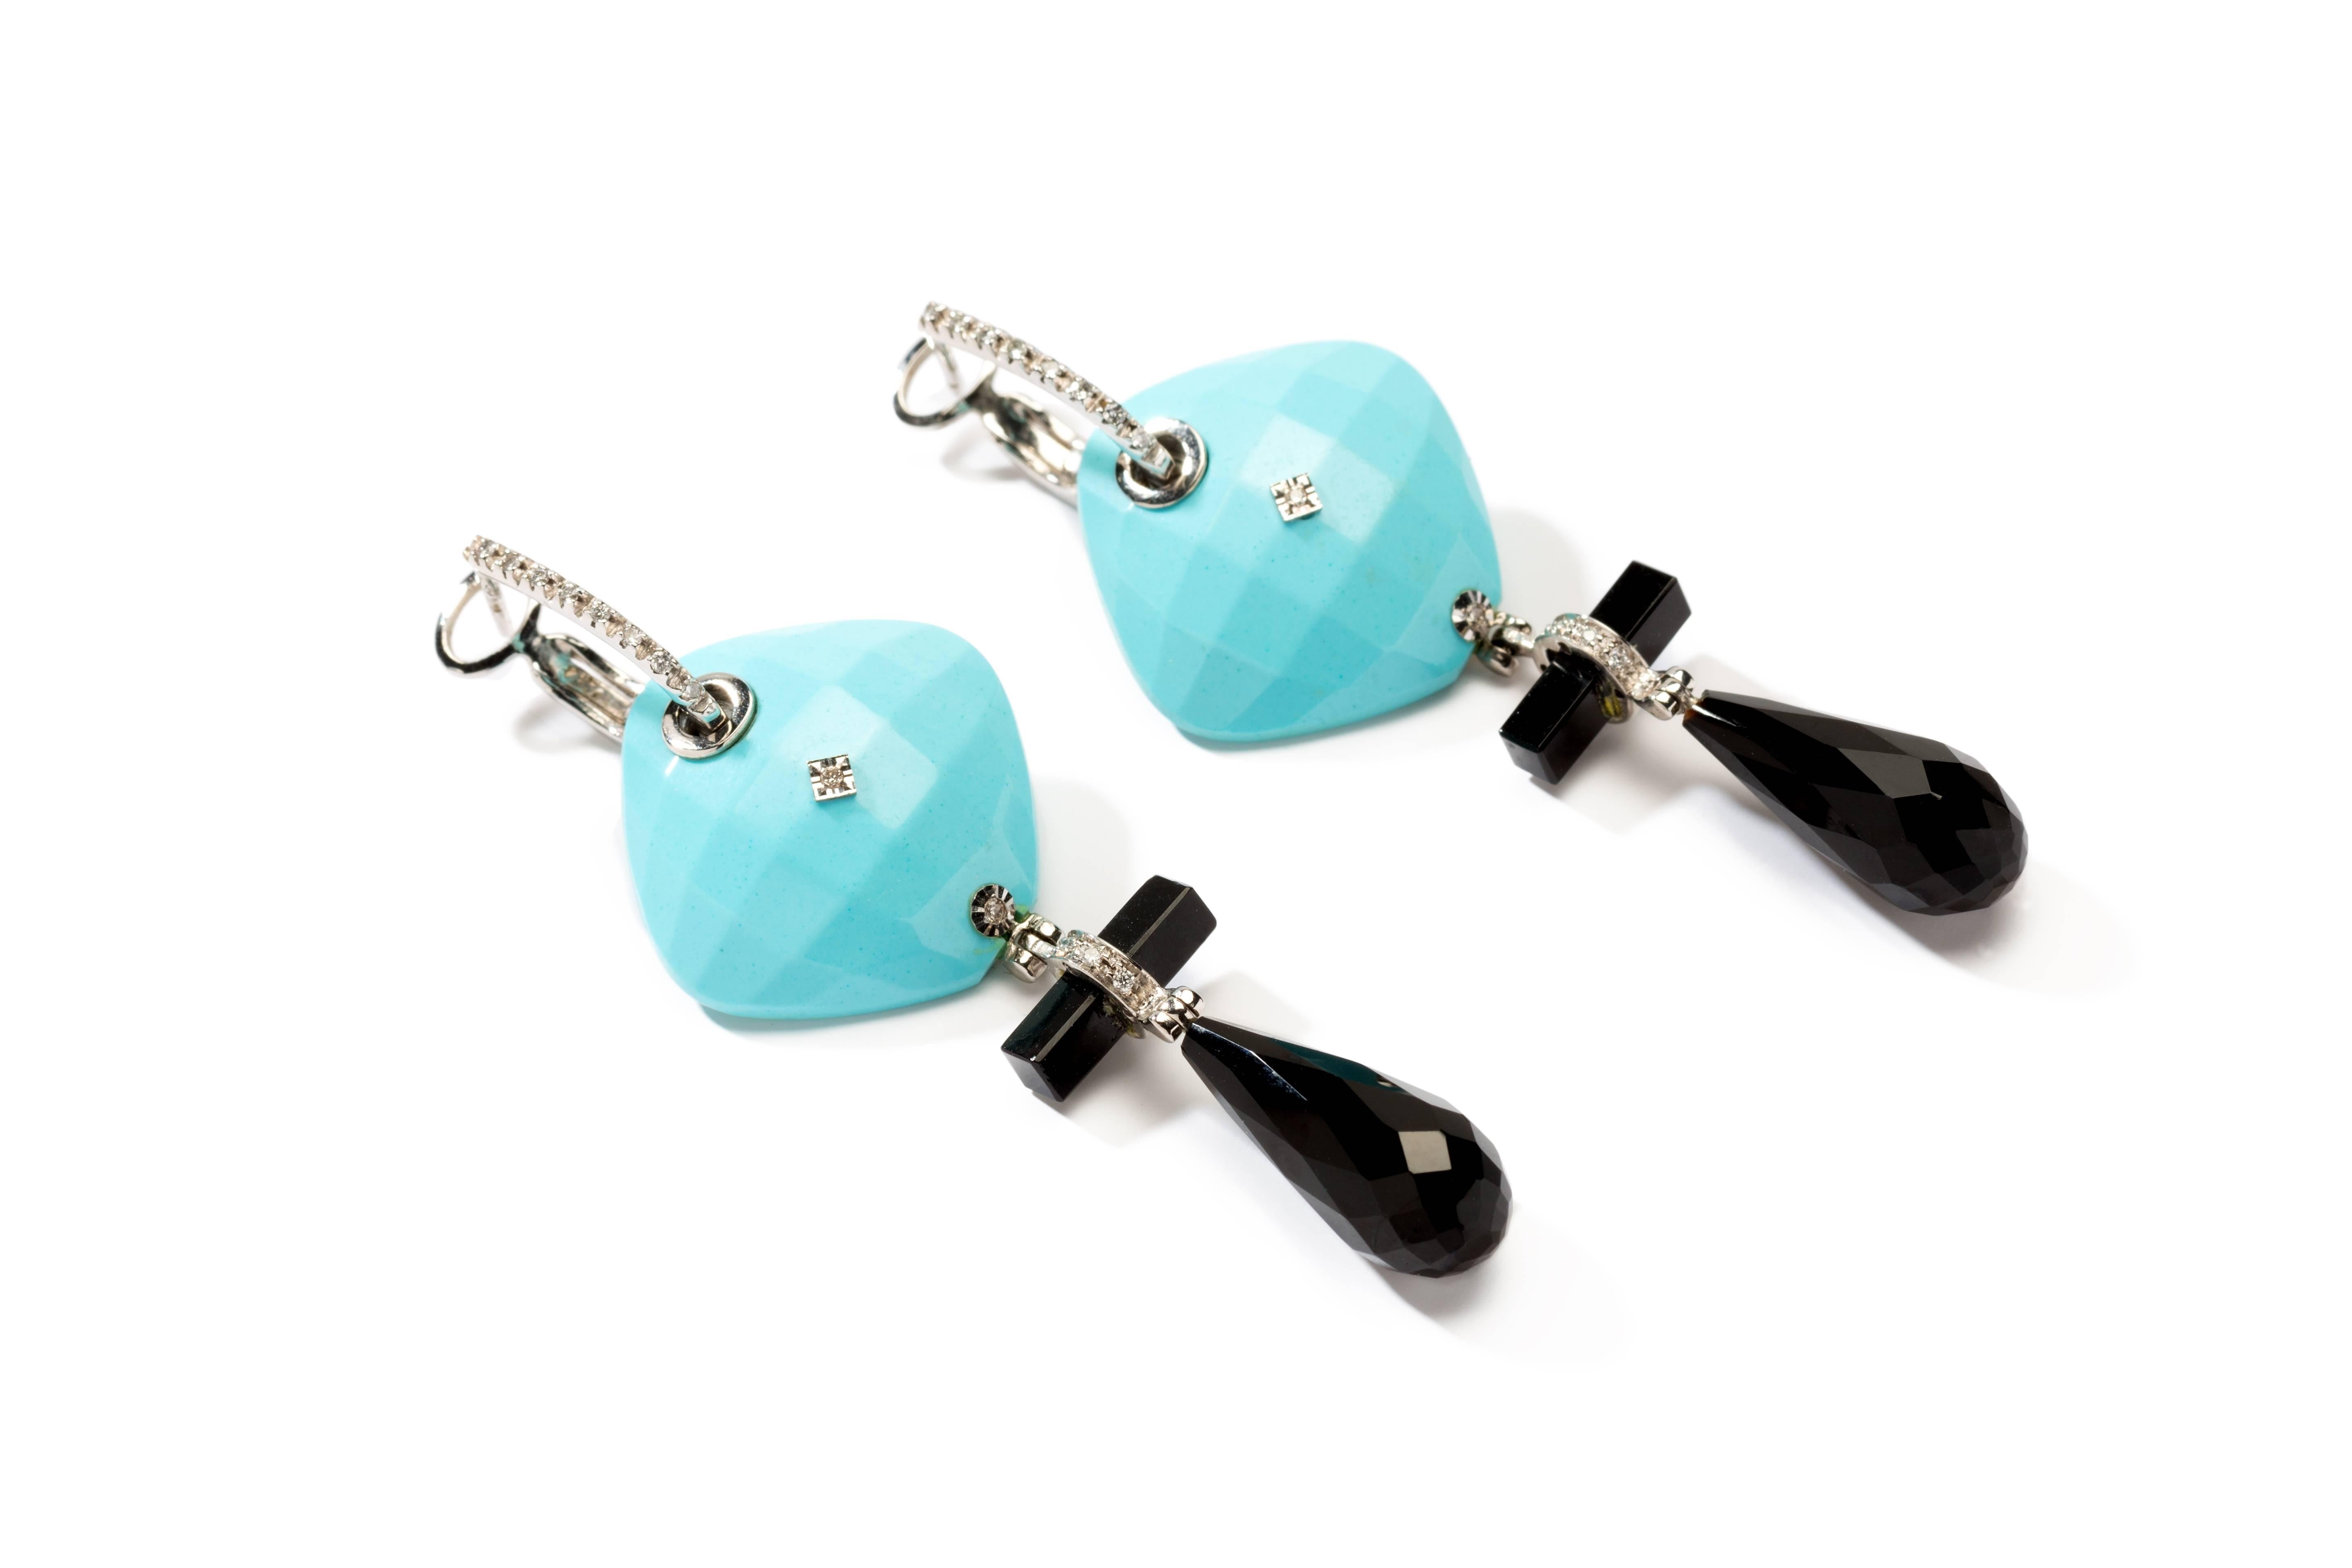 Italian design, 1970's. Set with 2 rectangular turquoise, 2 pear shaped onyx and 2 rod shaped onyx. Decorated with 28 brilliant-cut diamonds weighing ca. 0,19 ct. Mounted in 18 K white gold. Each earring hallmarked on a yellow gold badges with